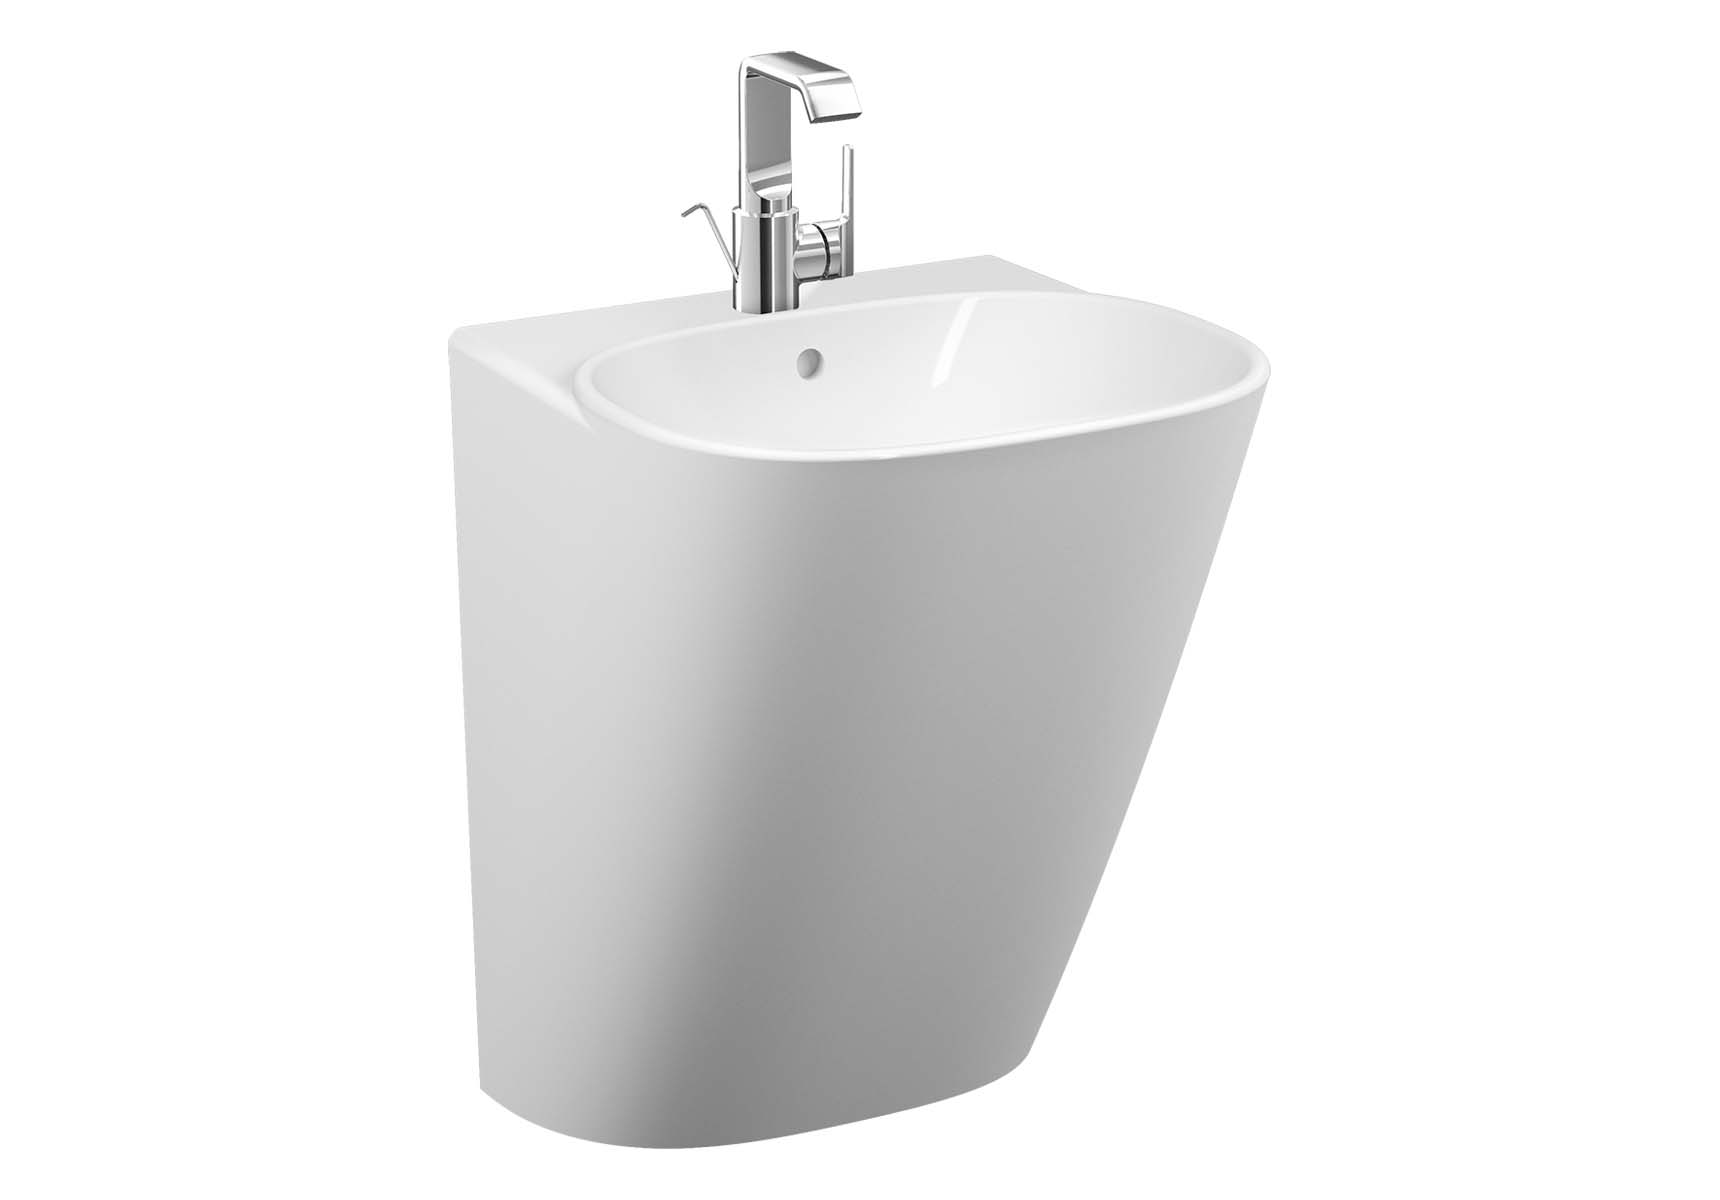 Frame Half monoblock basin, 50 cm, with one tap hole, with overflow hole, white, 424216 waste set and trap is included